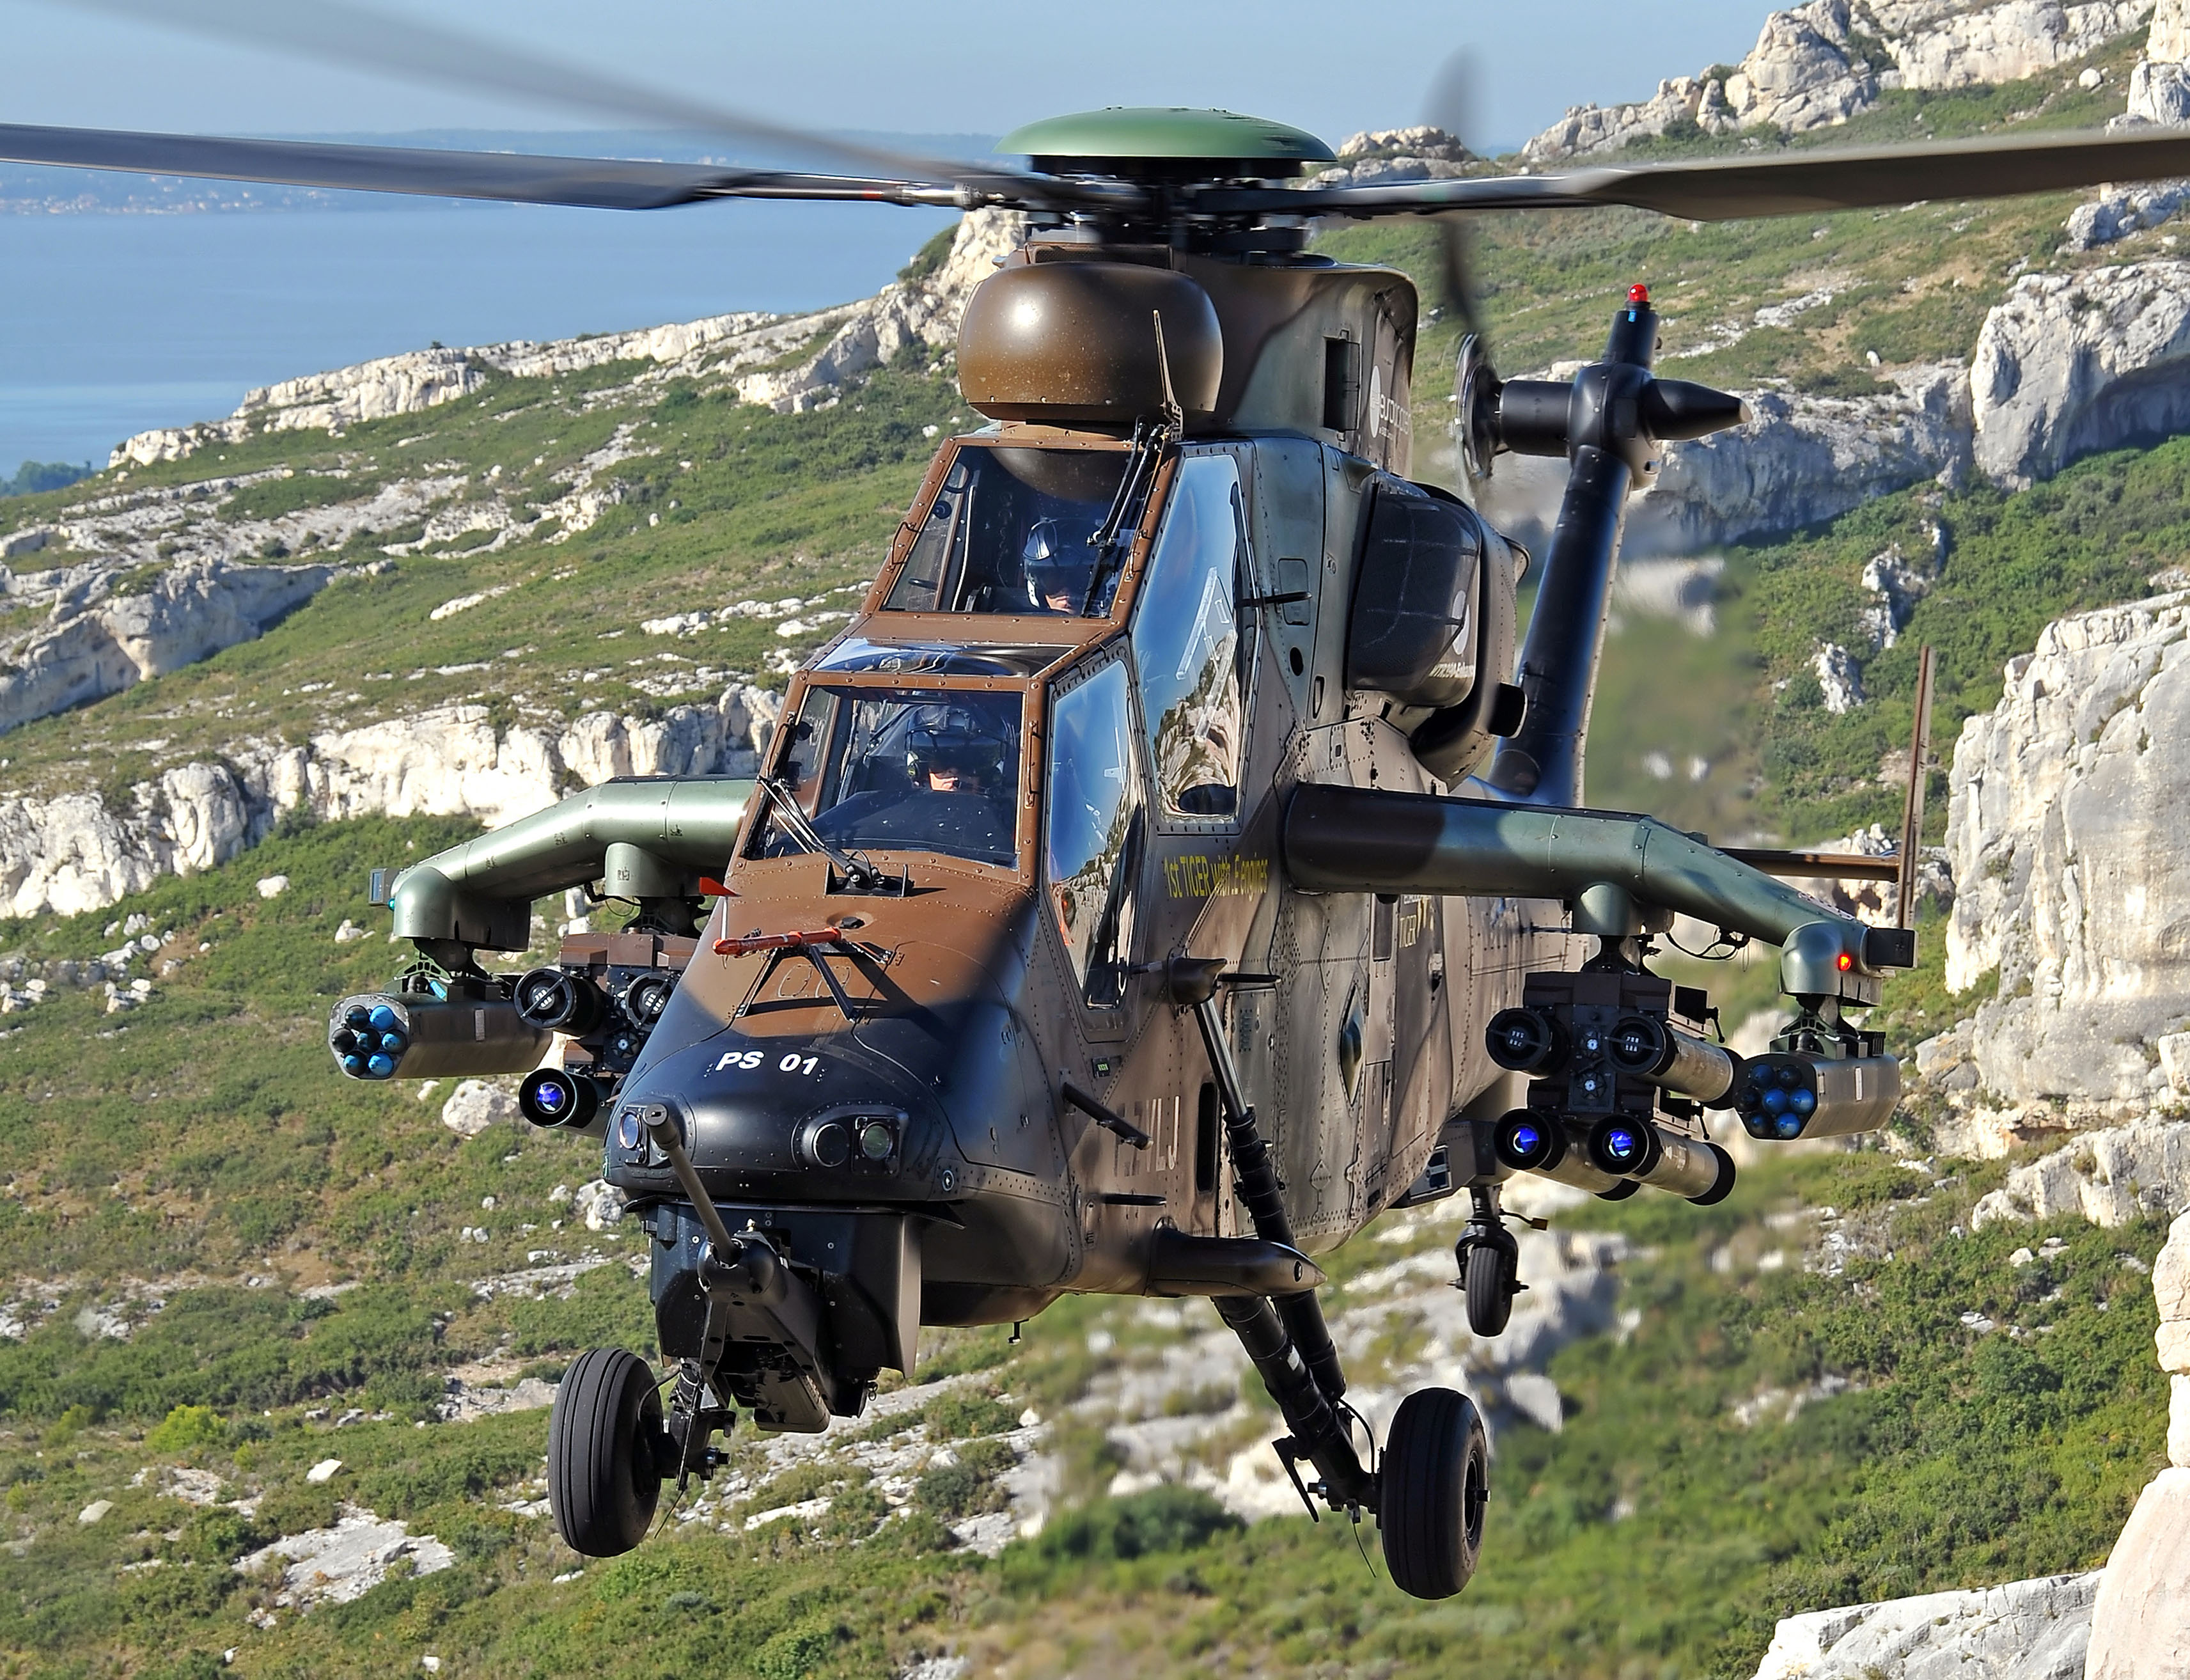 The Tiger HAD is Airbus Helicopters’ multi-role attack helicopter. It is designed to perform armed reconnaissance, air or ground escort, air-to-air combat, ground firing support, destruction, and anti-tank warfare.